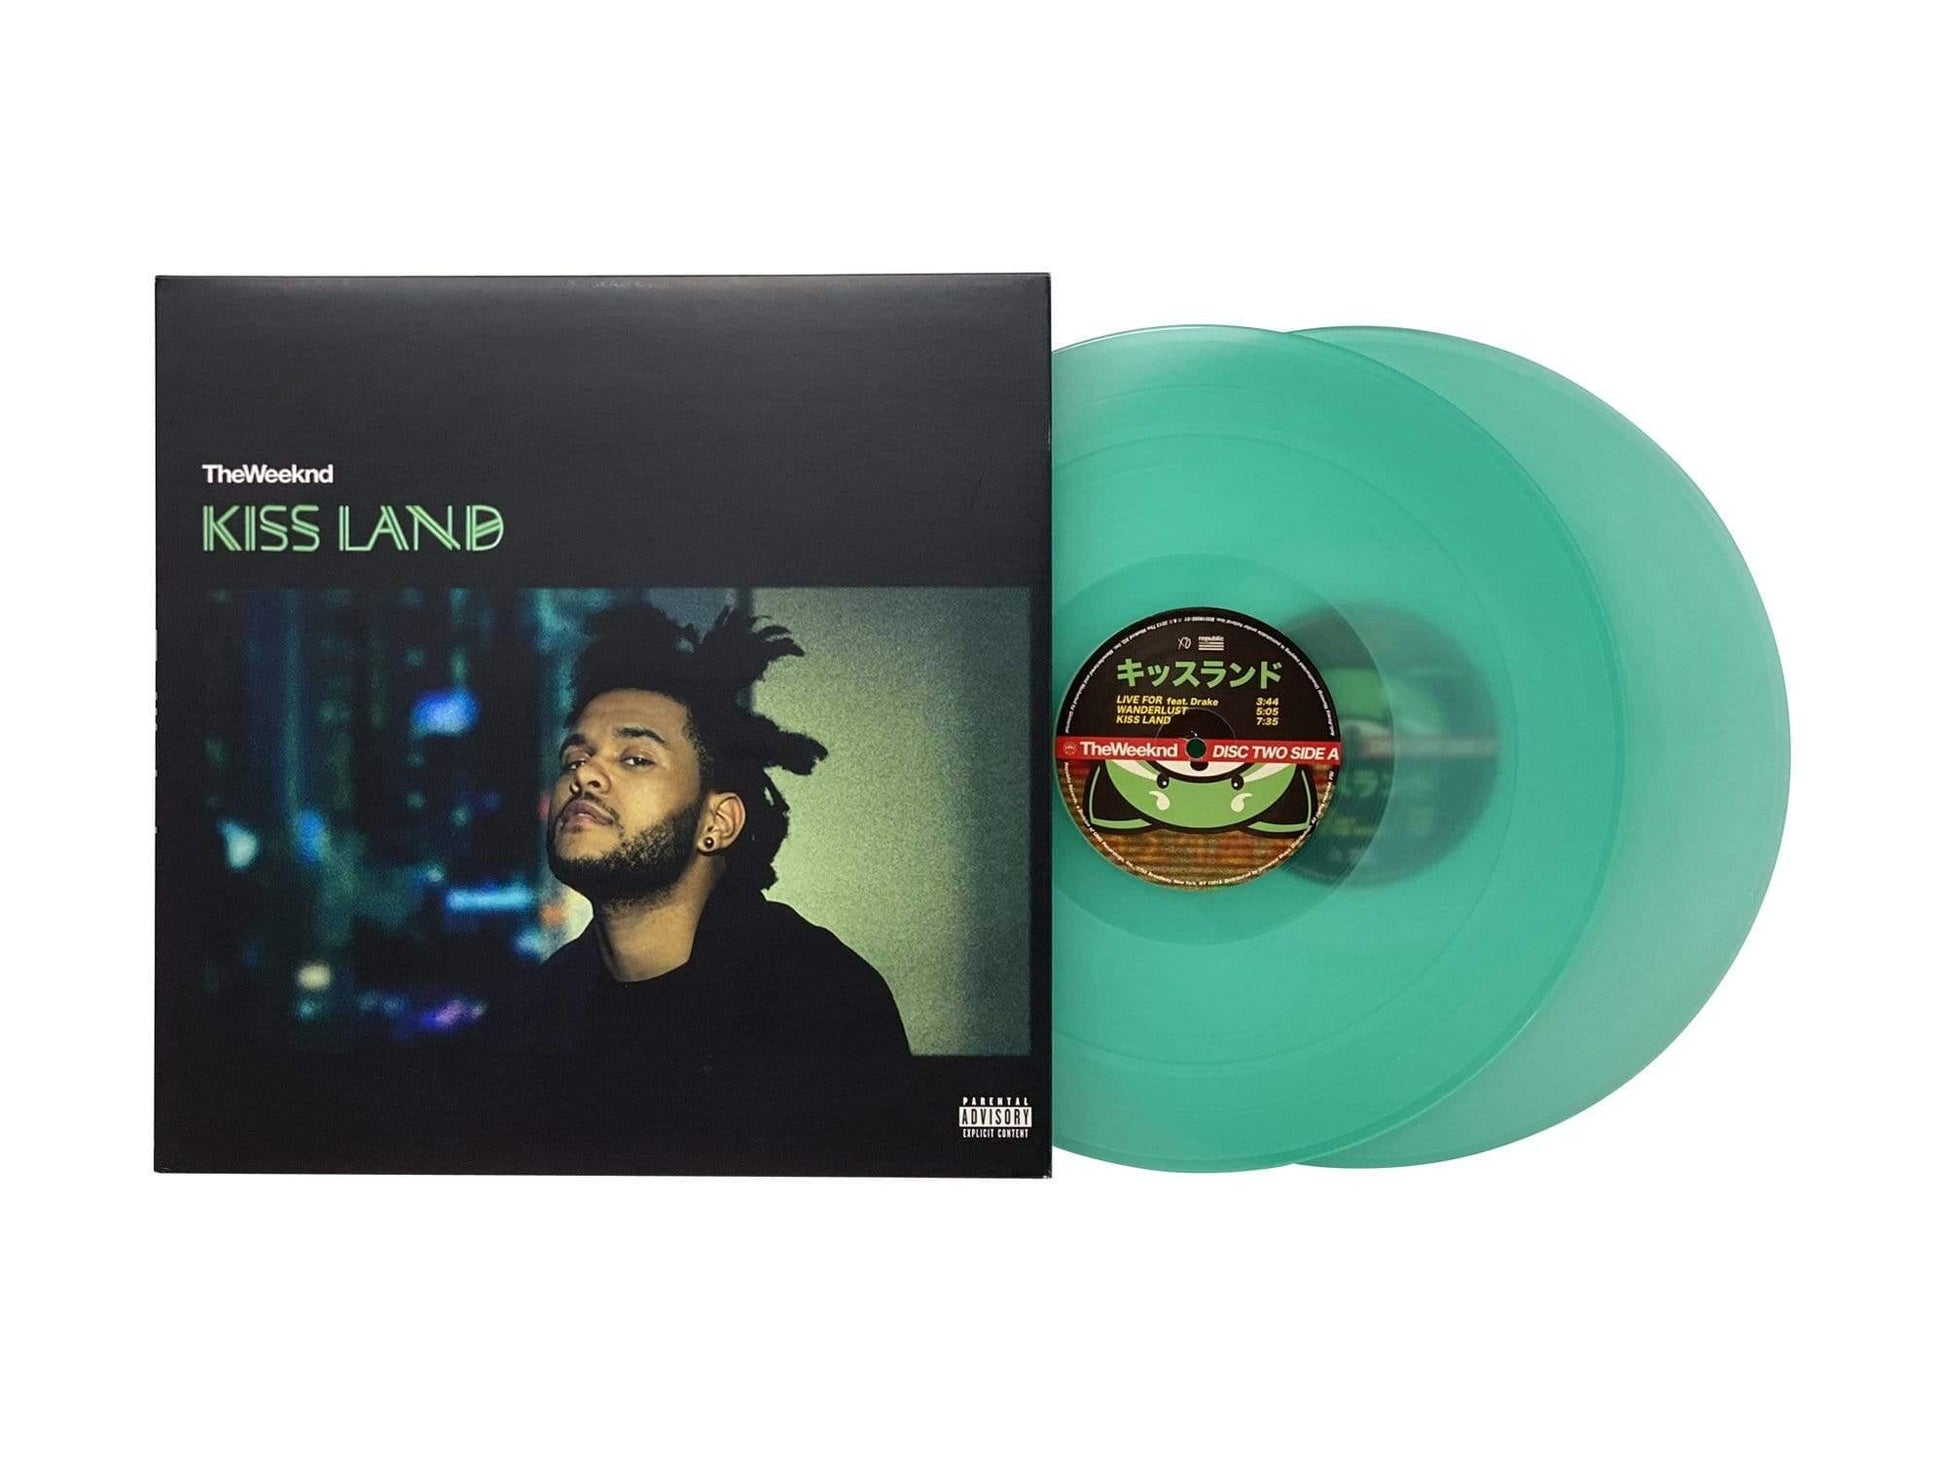 The Weeknd THE HIGHLIGHTS Color Vinyl 2xLP Record NEW